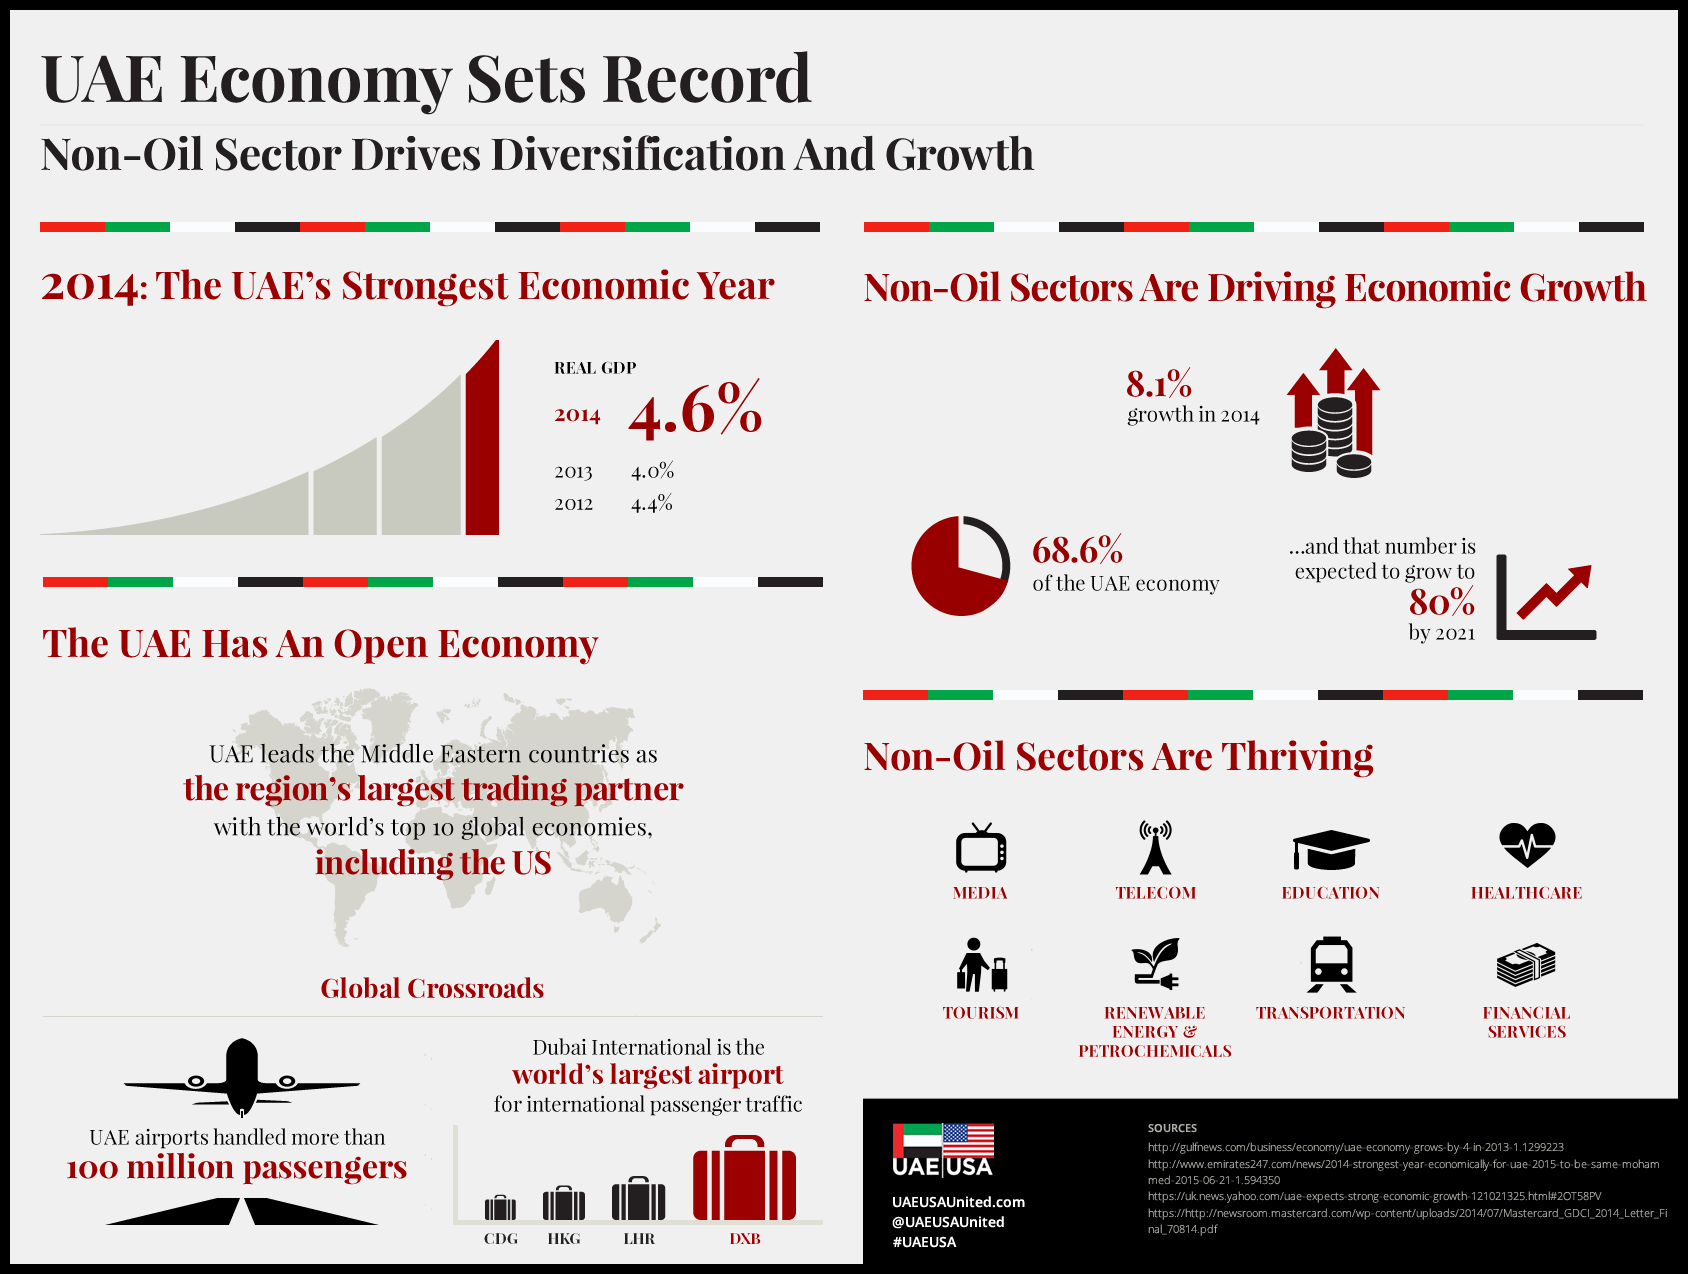 2014 was the UAE’s strongest year, with real GDP growing by 4.6%. The UAE’s impressive economic growth is being driven by its non-oil sector, which makes up 68.6% of the UAE economy. Non-oil sectors are expected to continue to grow, reaching 80% of the UAE economy by 2021.